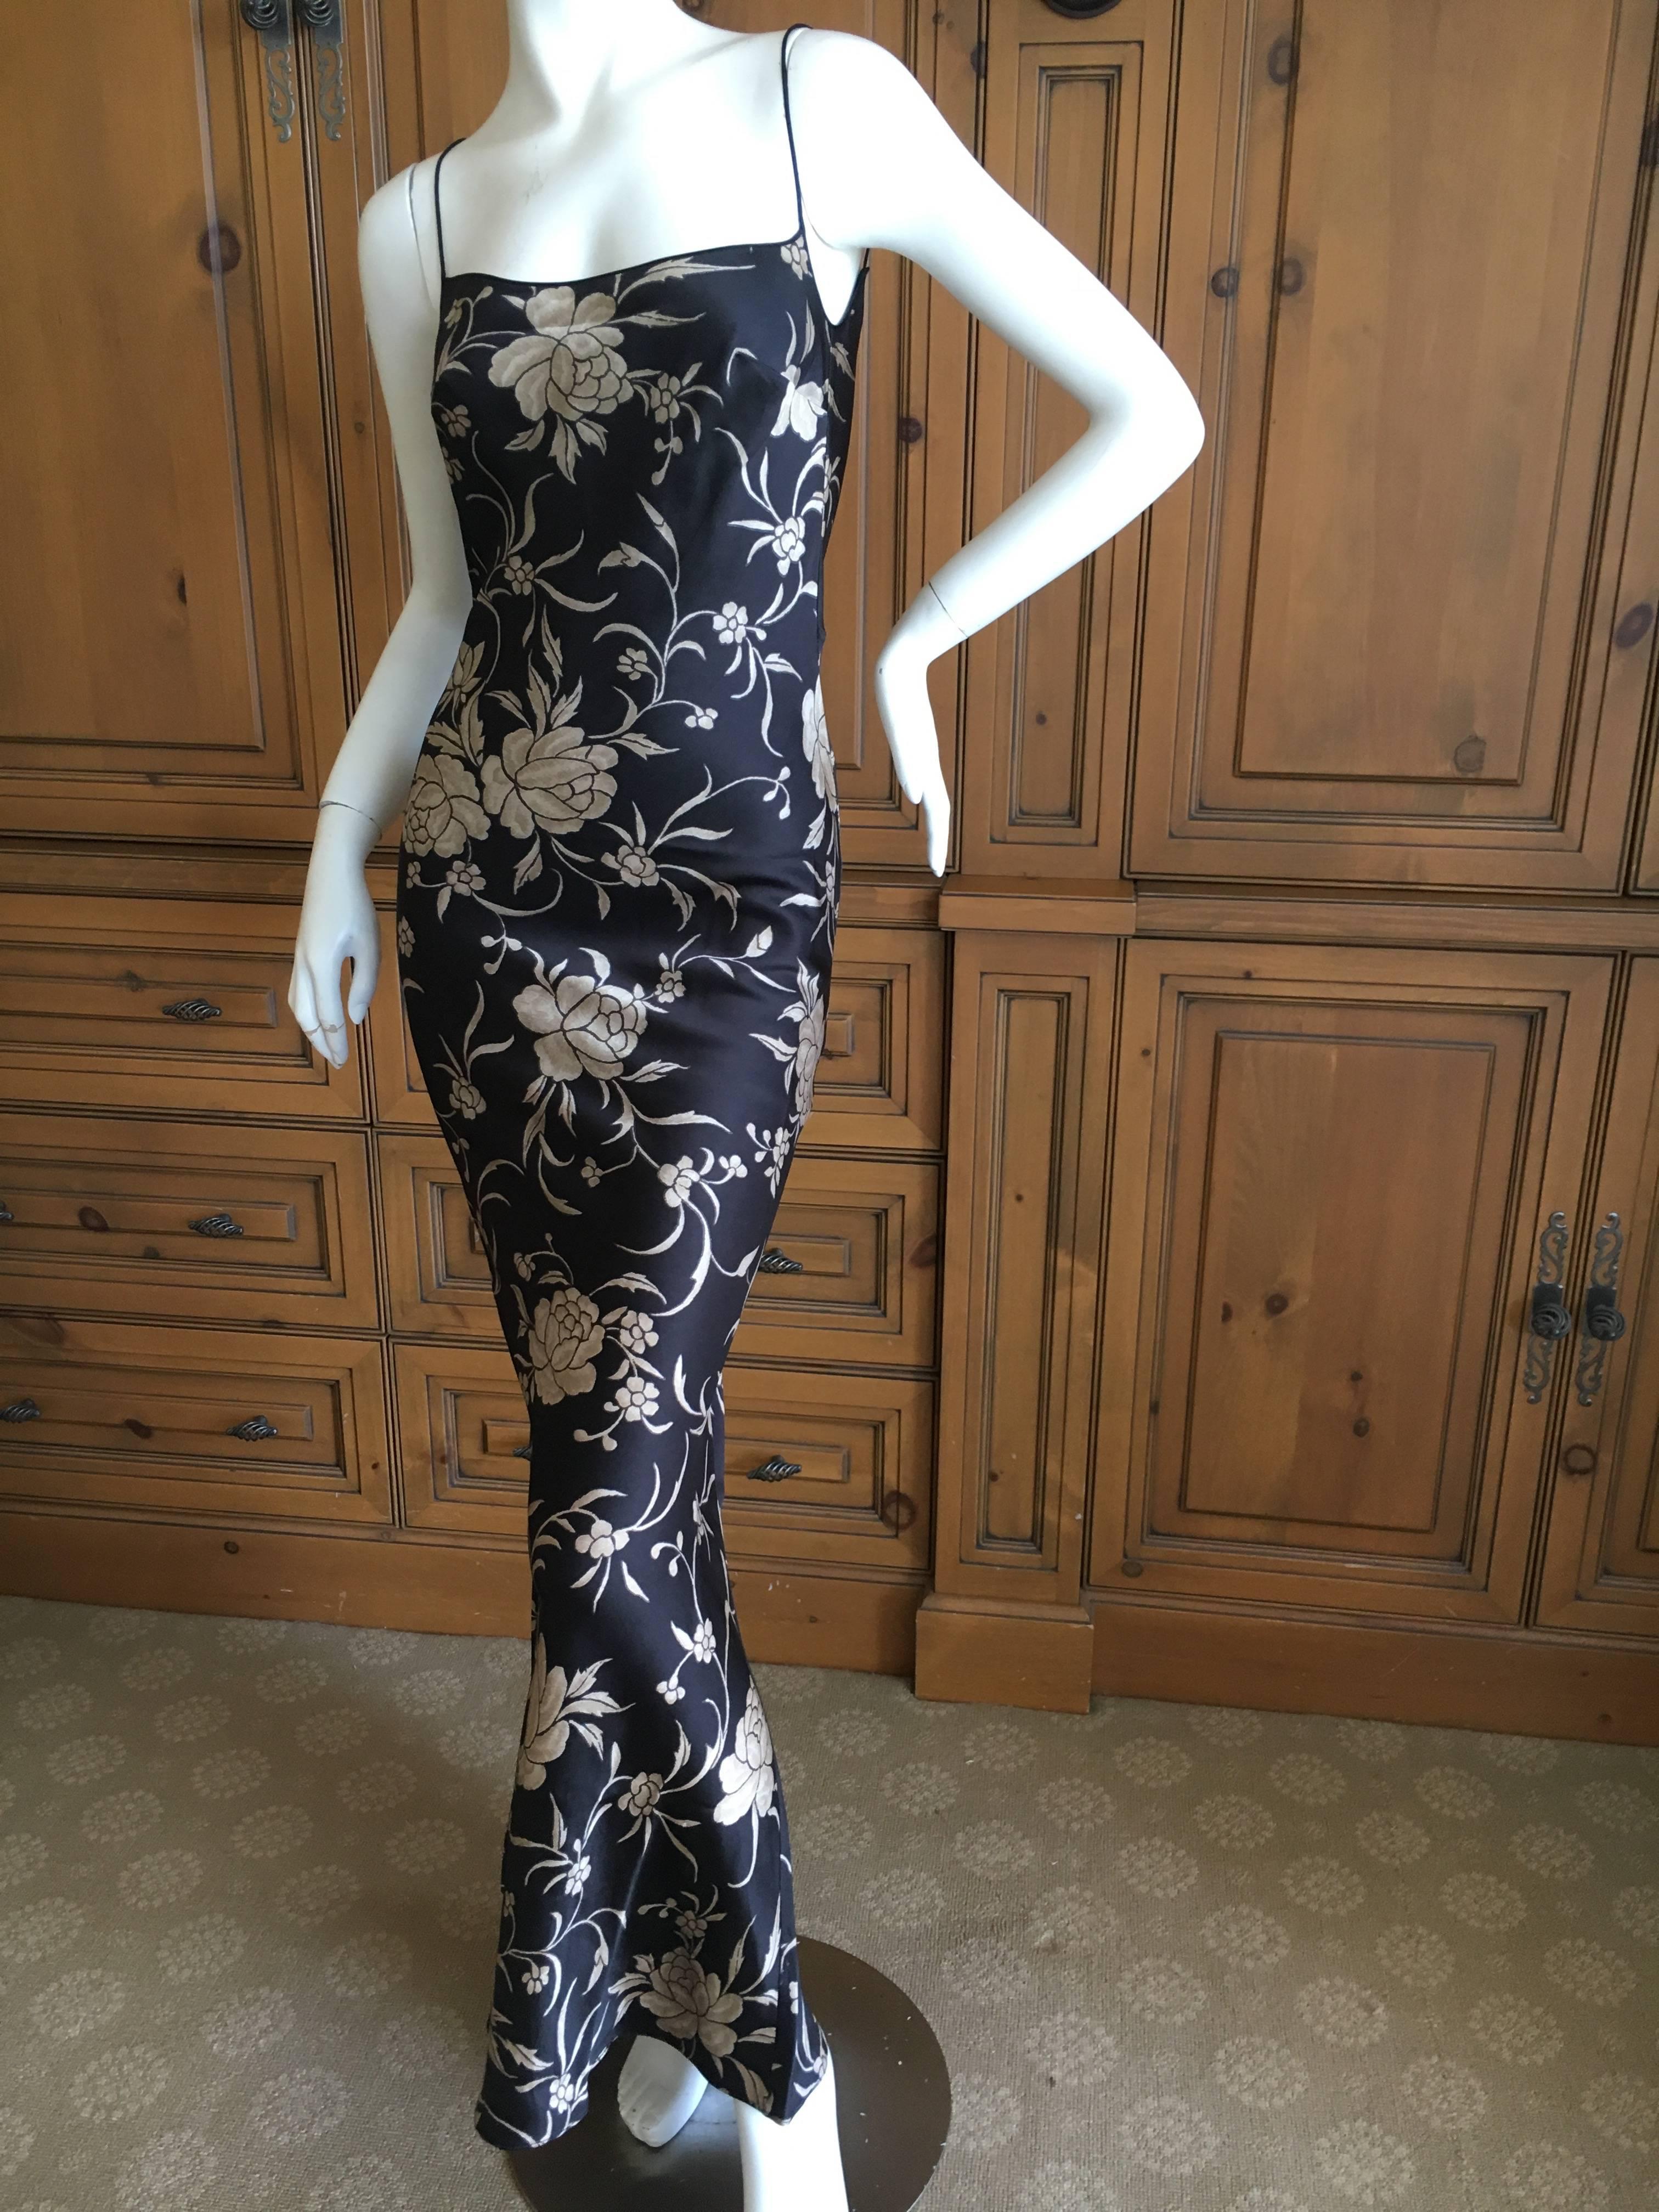 Exquisite floral bias cut dress from John Galliano circa 1996.
So much prettier in person.
Size 36
Bust 36